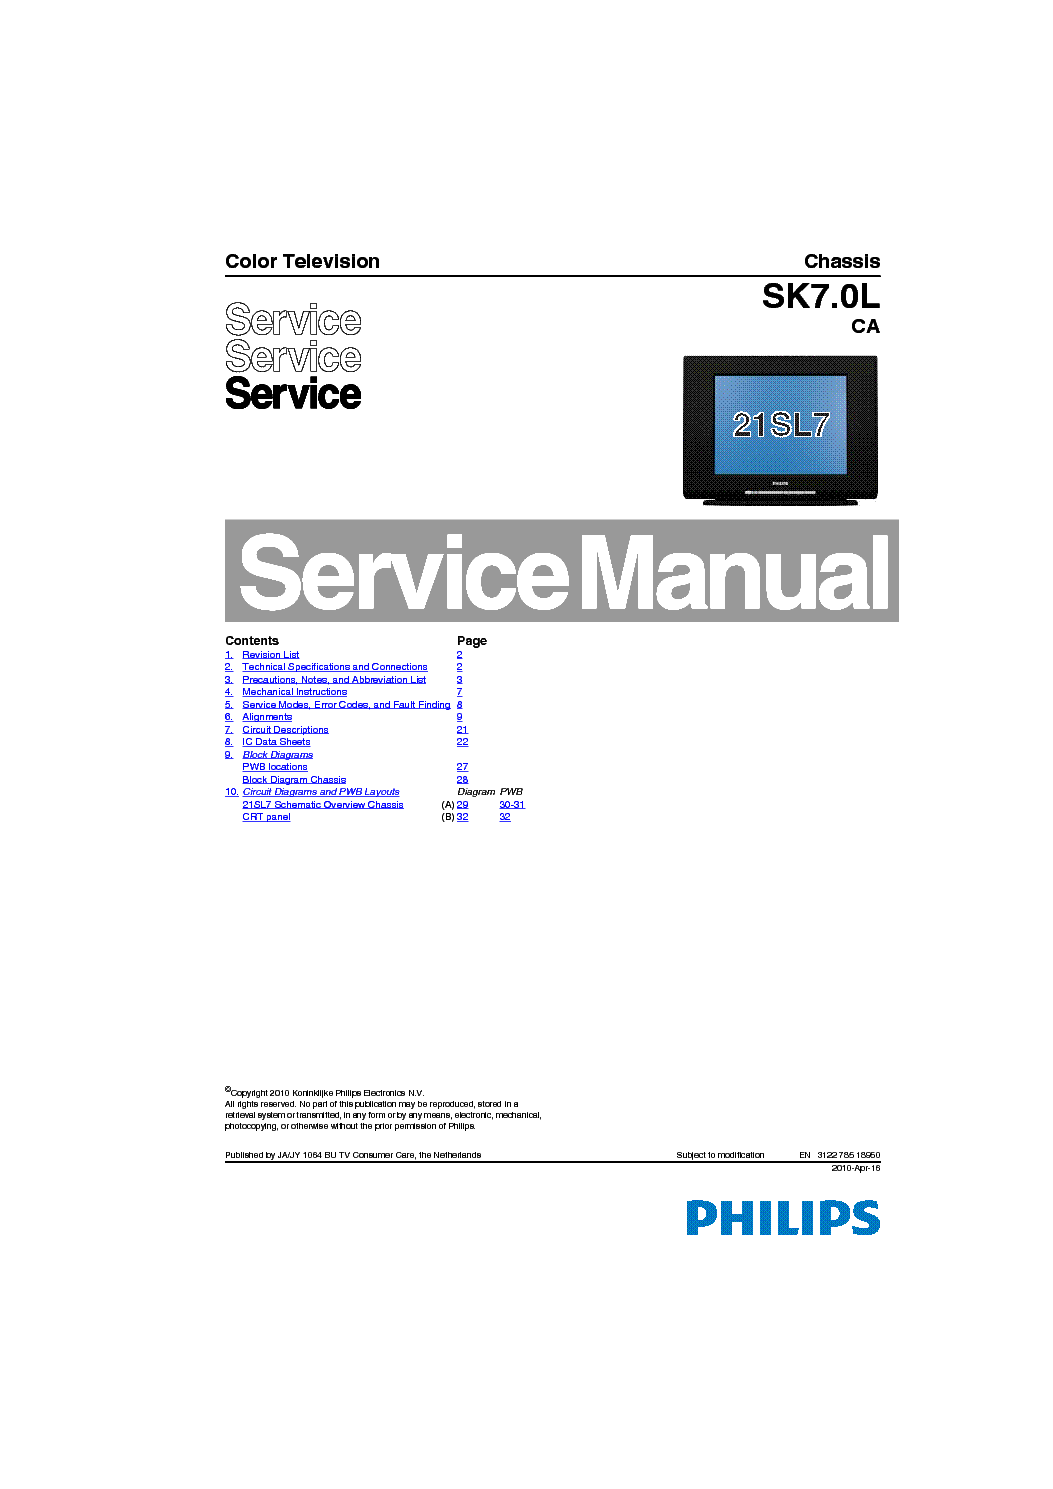 PHILIPS SK7.0L CA CHASSIS TV SM service manual (1st page)